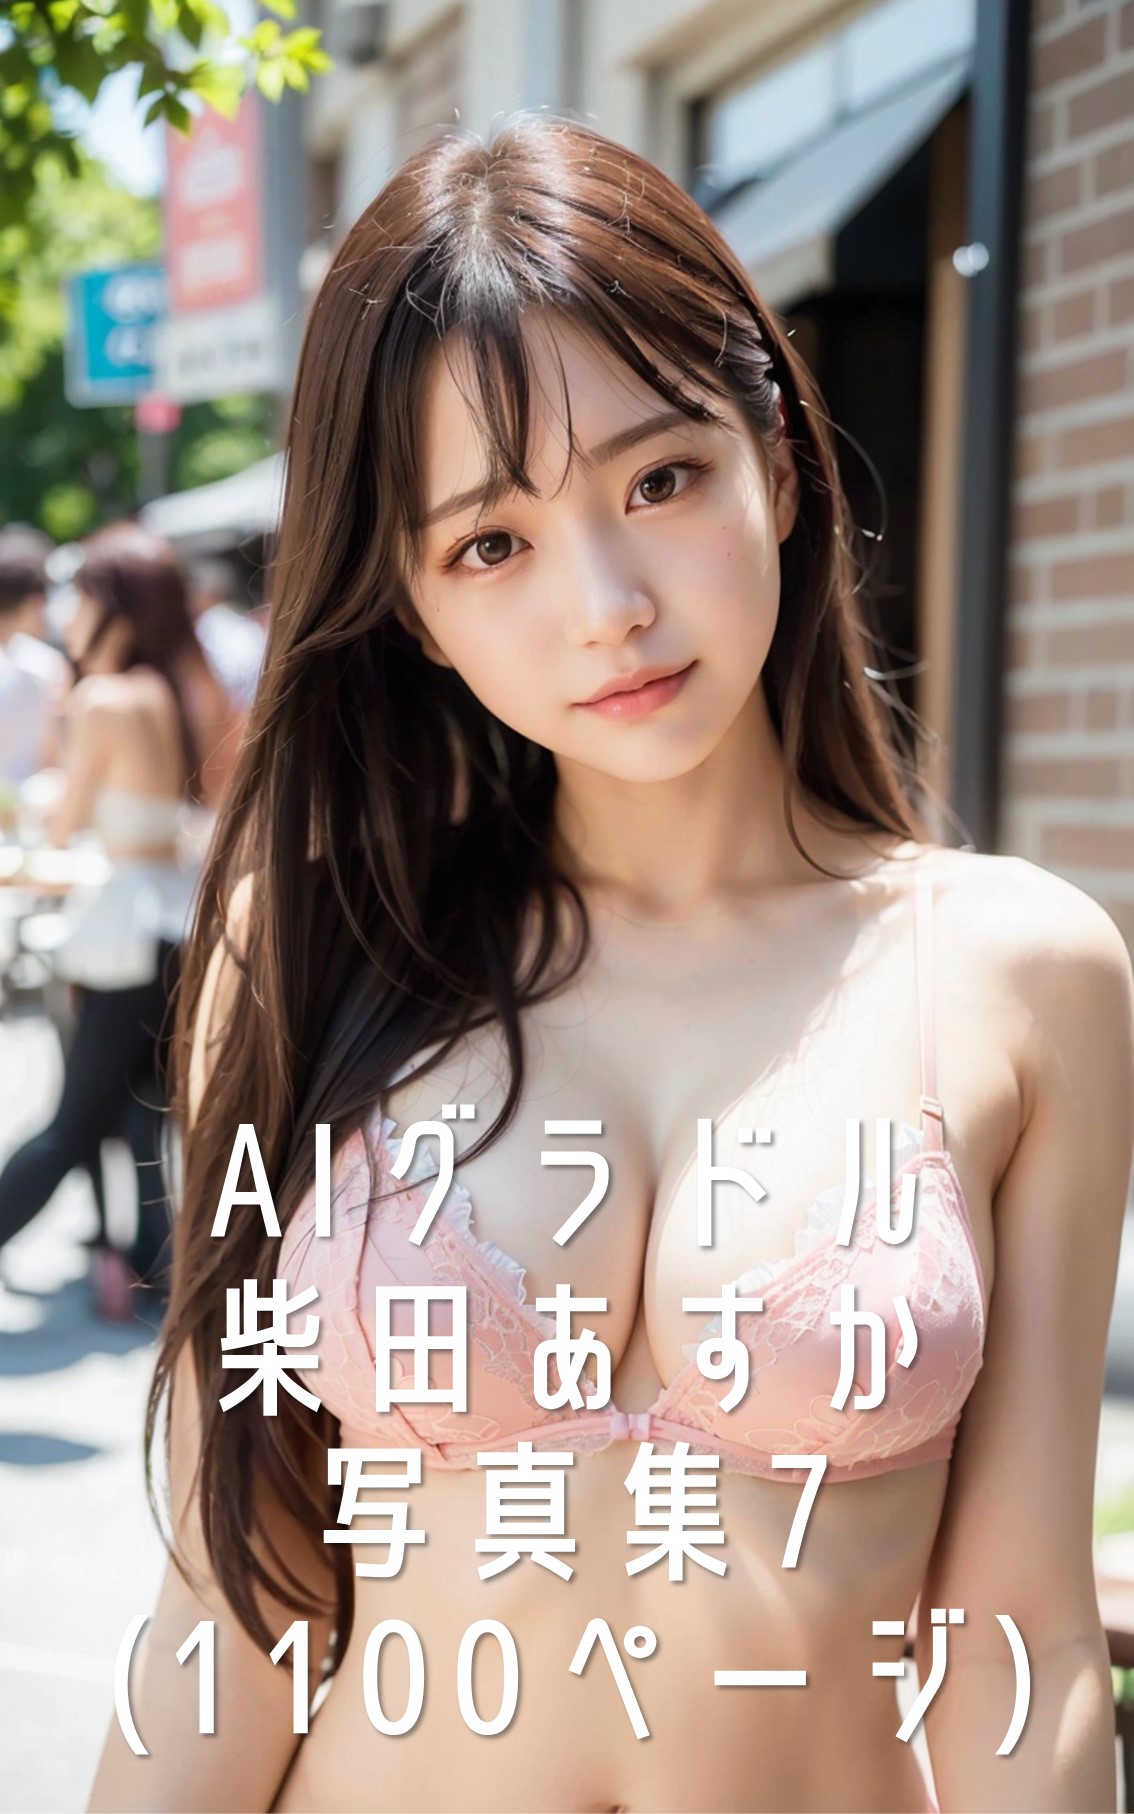 AI Gravure on X: More photos can be seen here! 【Japan】  t.codLlXz1iczd 【Others】 t.cowBtZslyjIy  t.coBcHKcFhxts  X